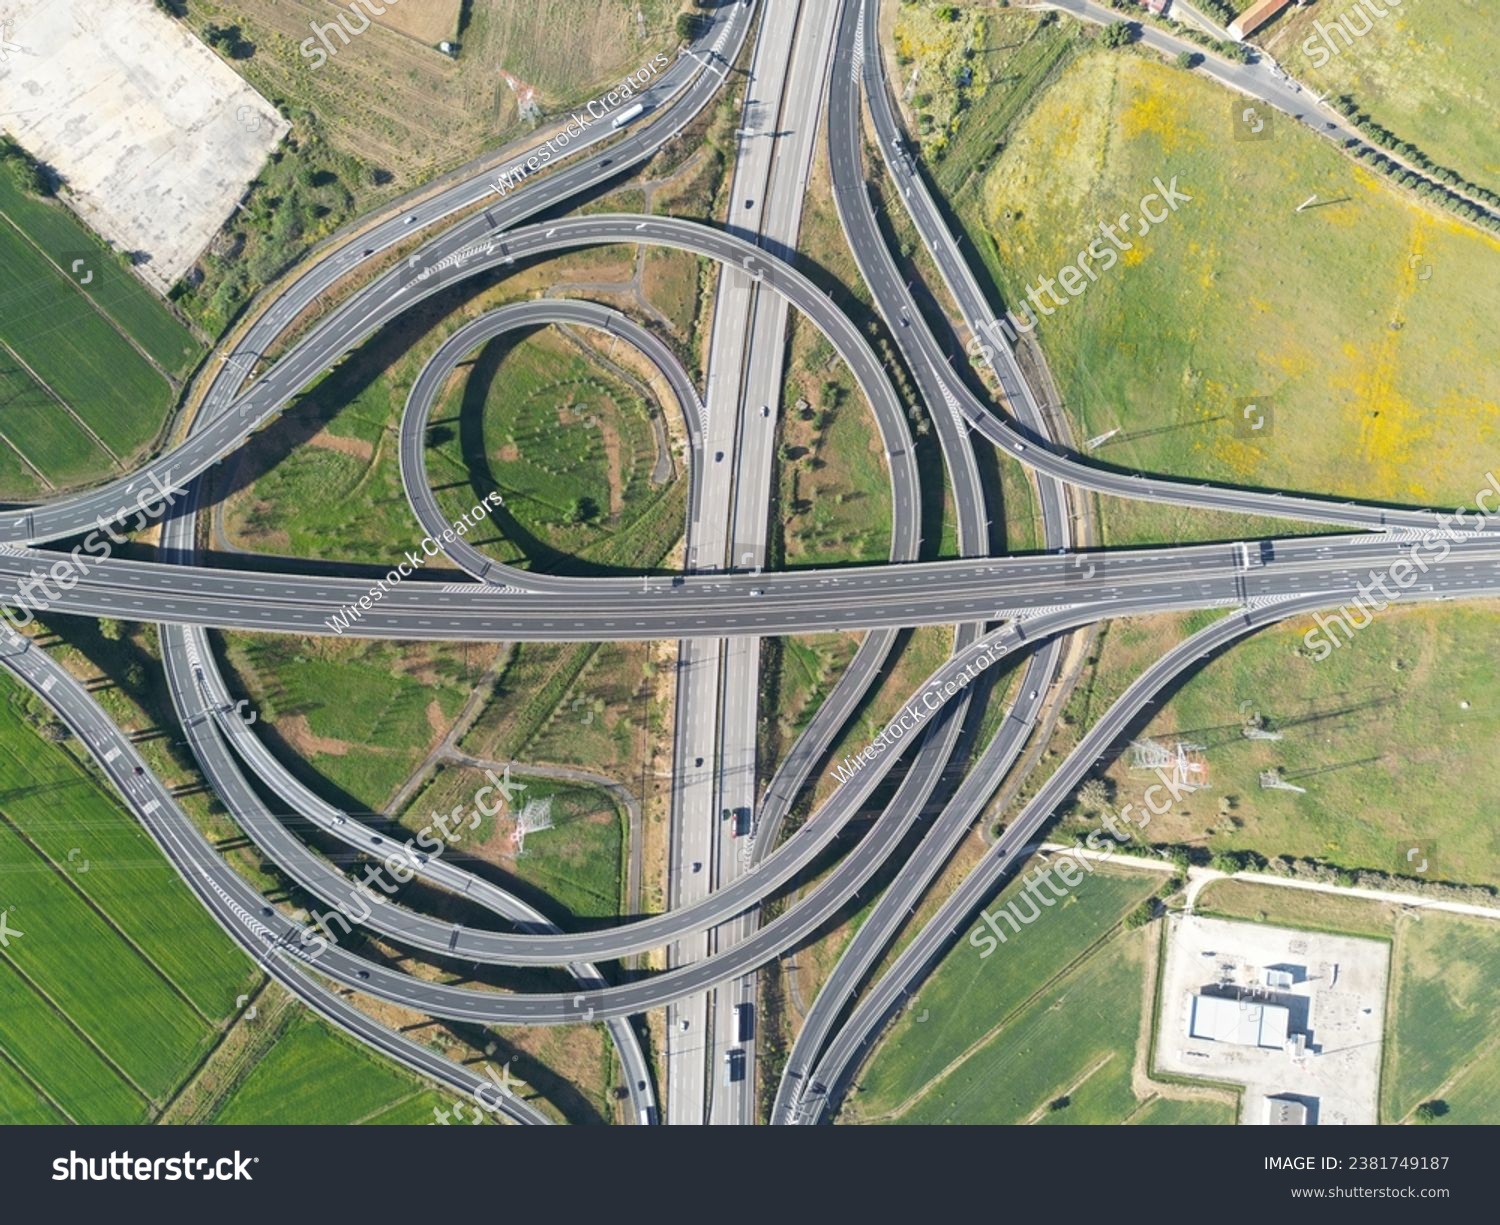 Aerial view of a four-lane highway intersection with a car driving along one of the lanes #2381749187